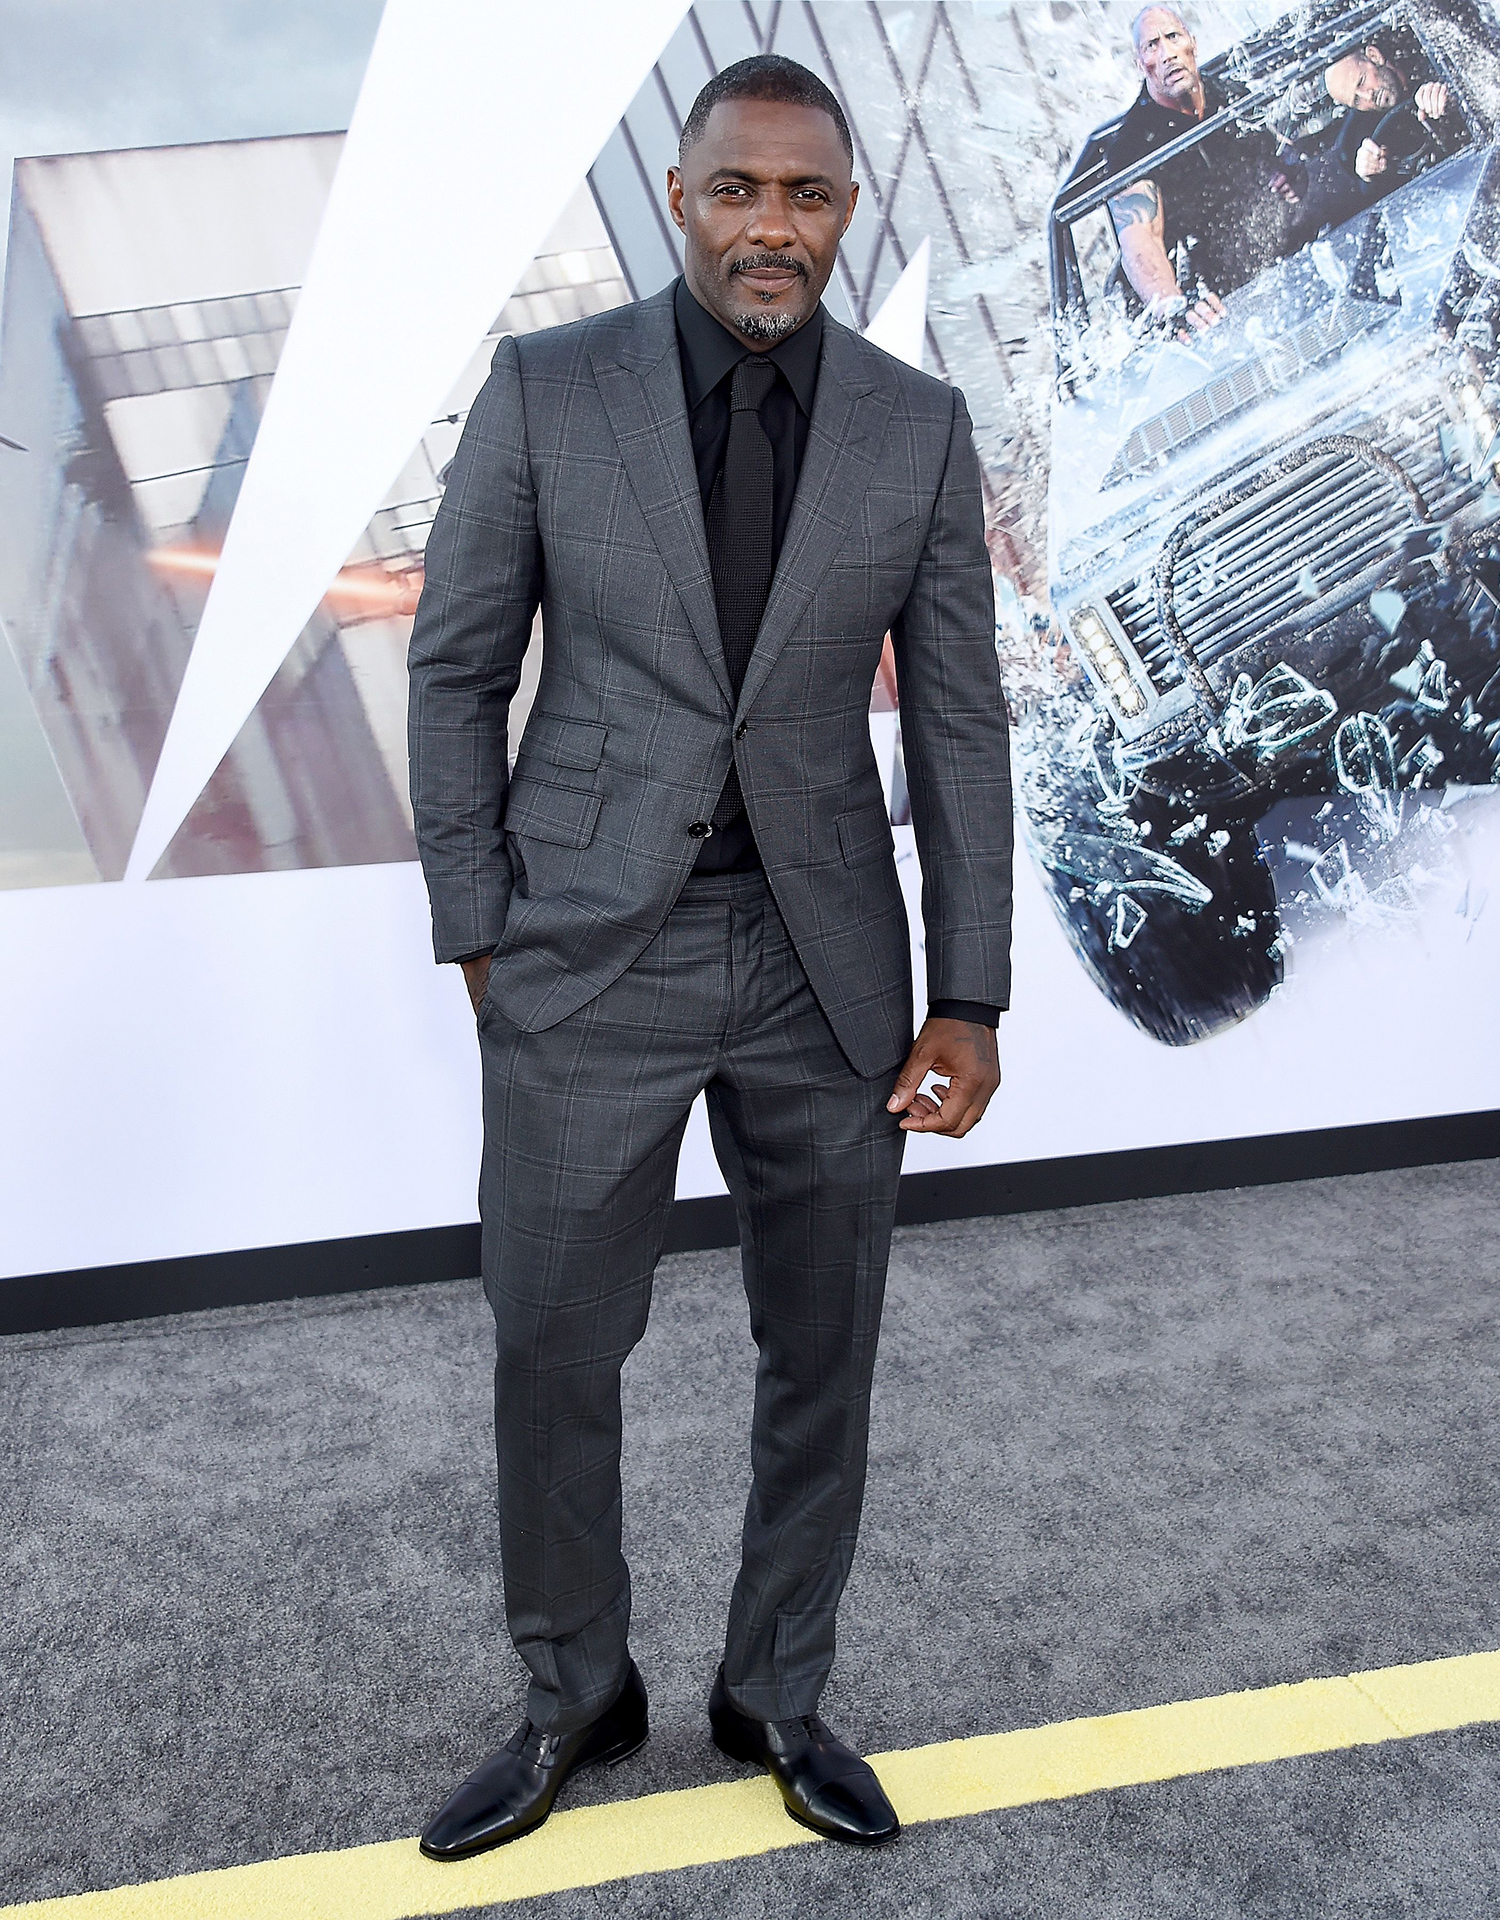 Elba wears a grey plaid suit with a black shirt